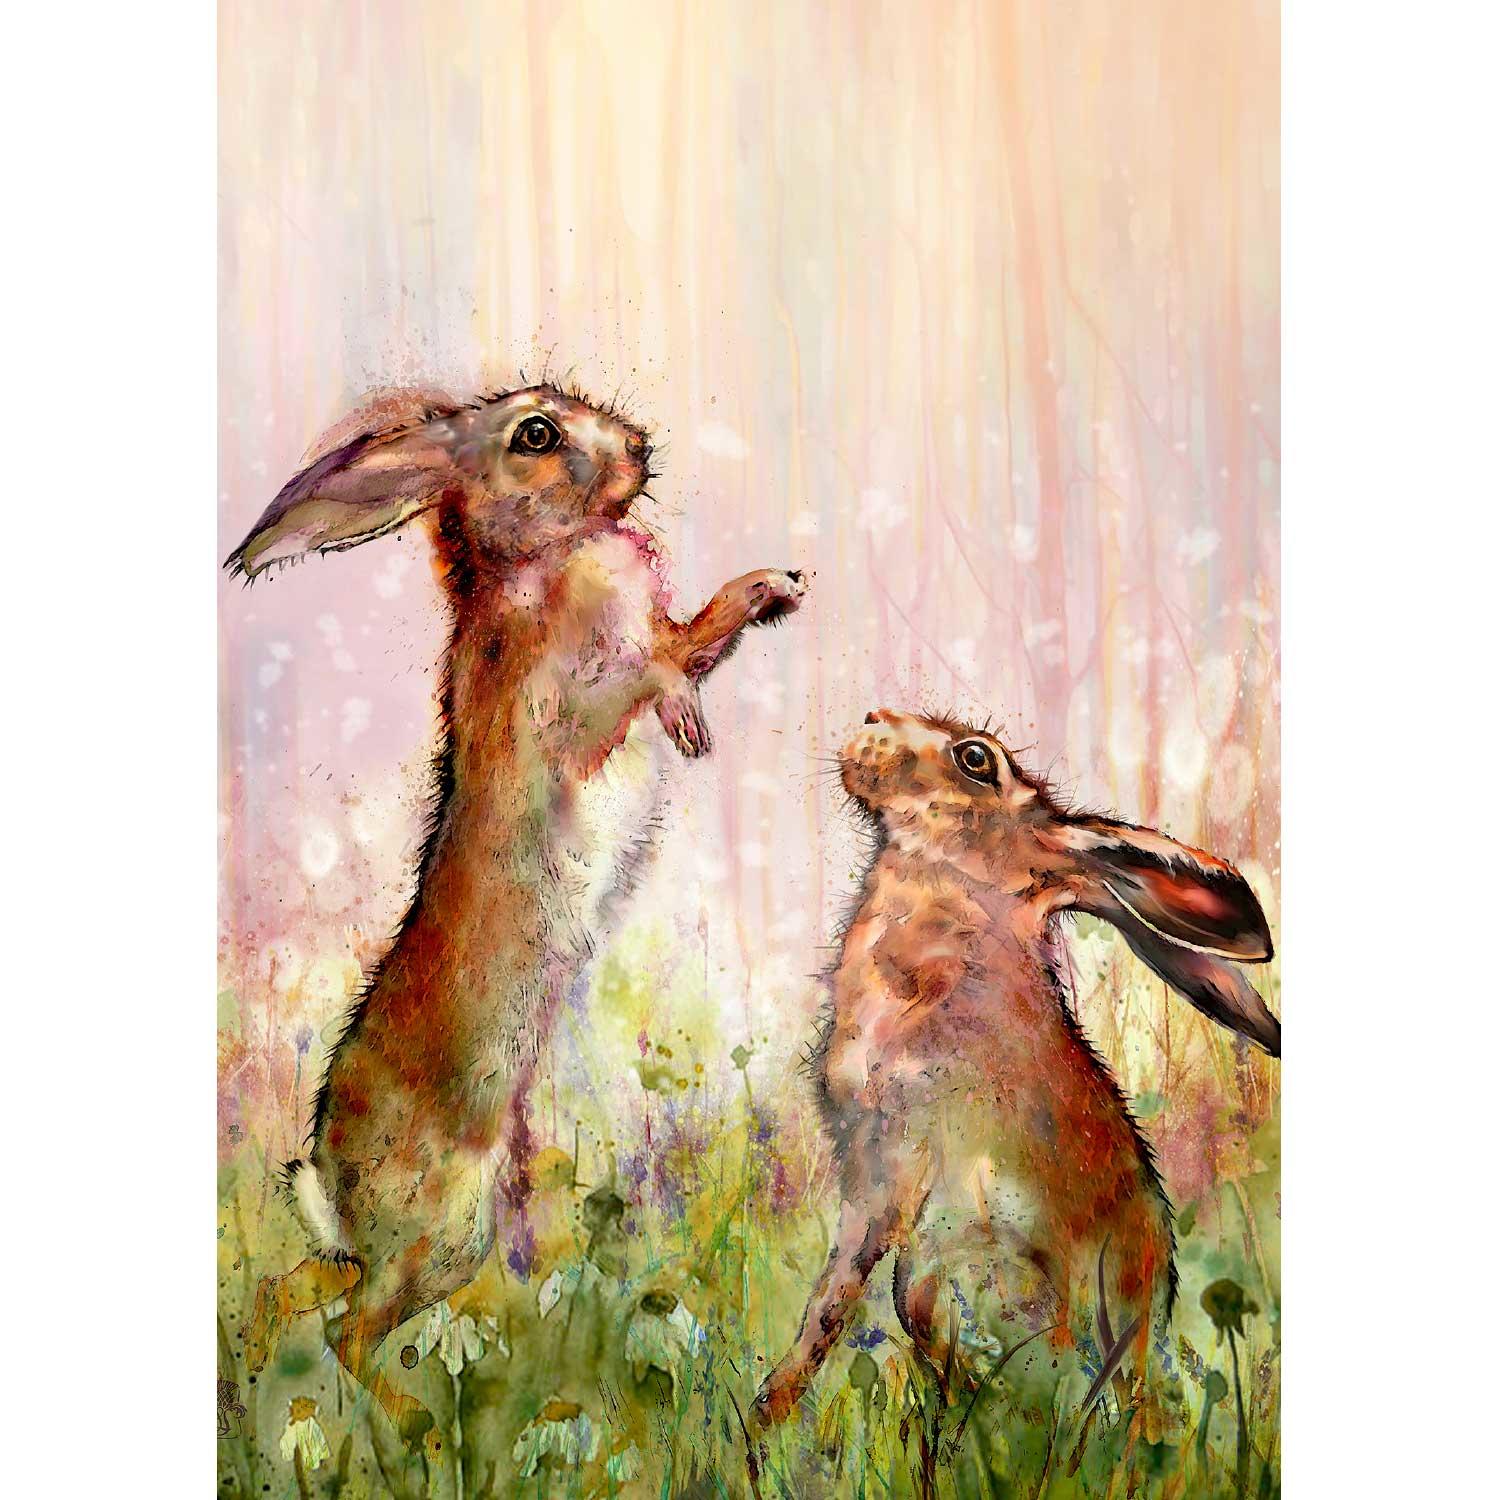 Hare by artist Lee Scammacca